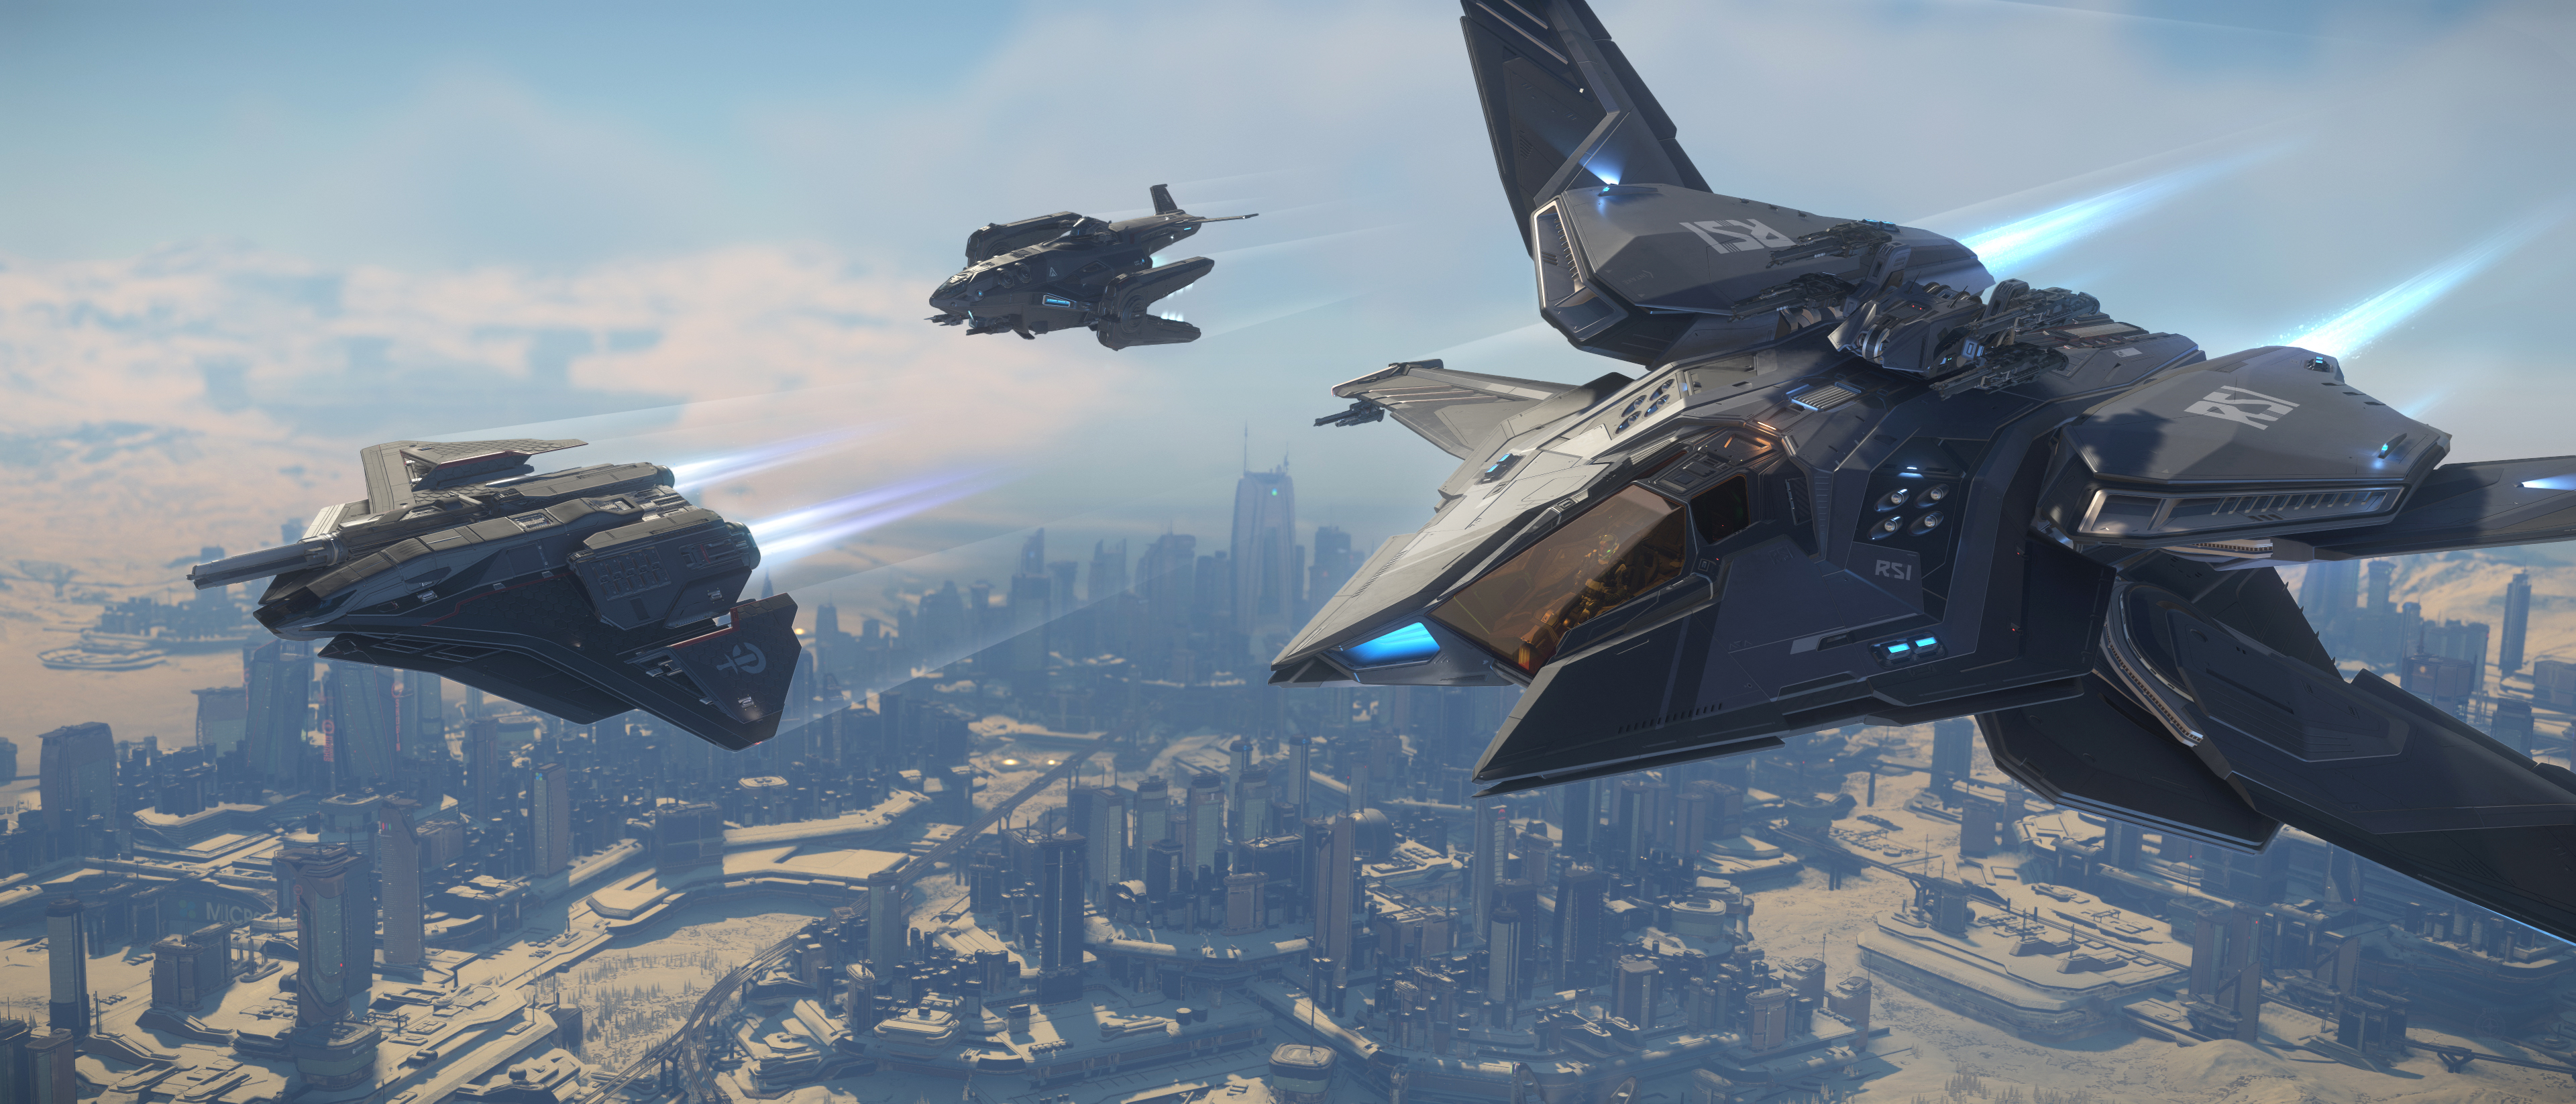 Star Citizen Invictus Week 2952 gives free play access to everyone